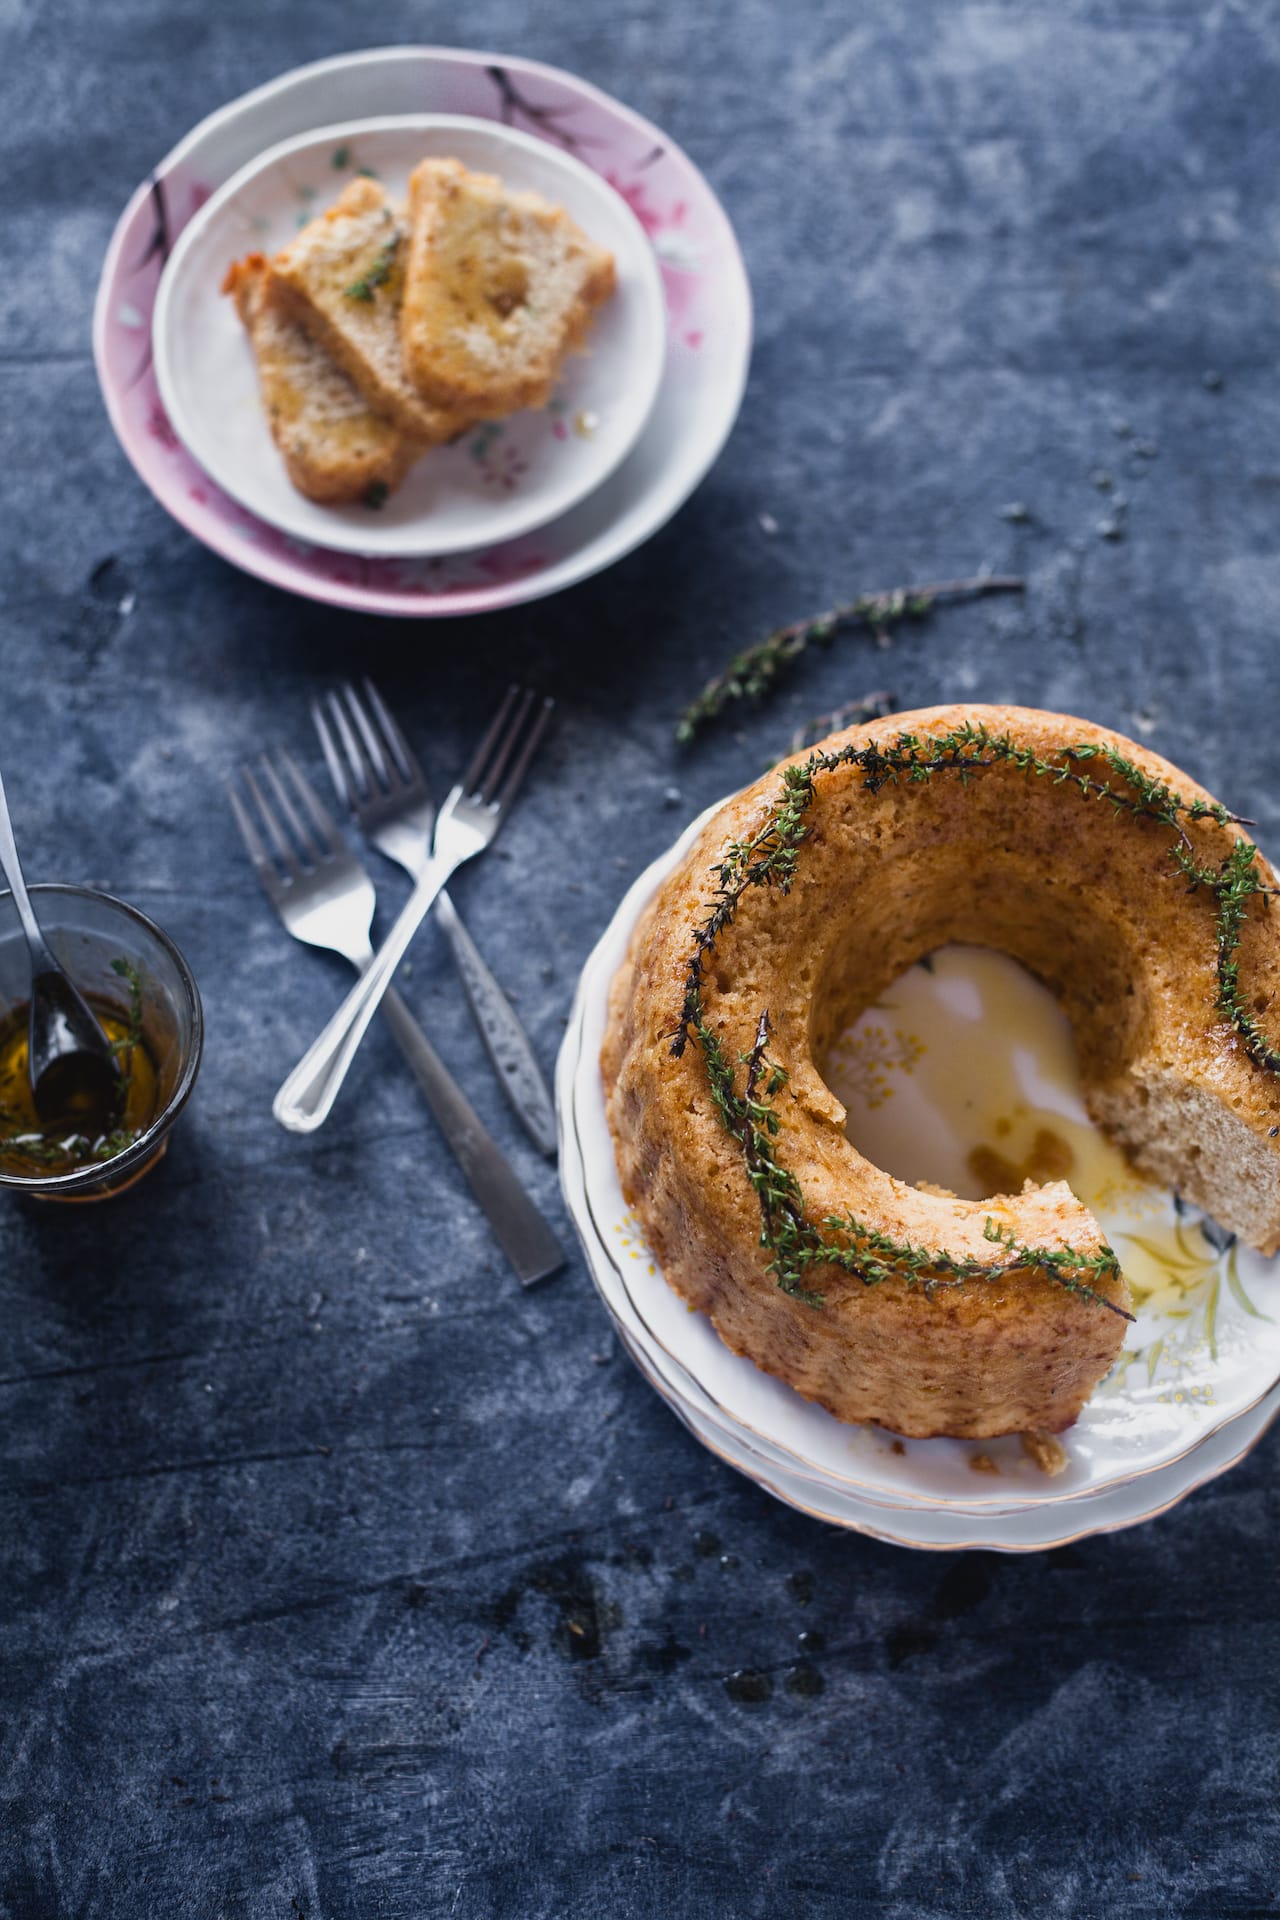 Honey and Thyme Bundt Cake | Playful Cooking